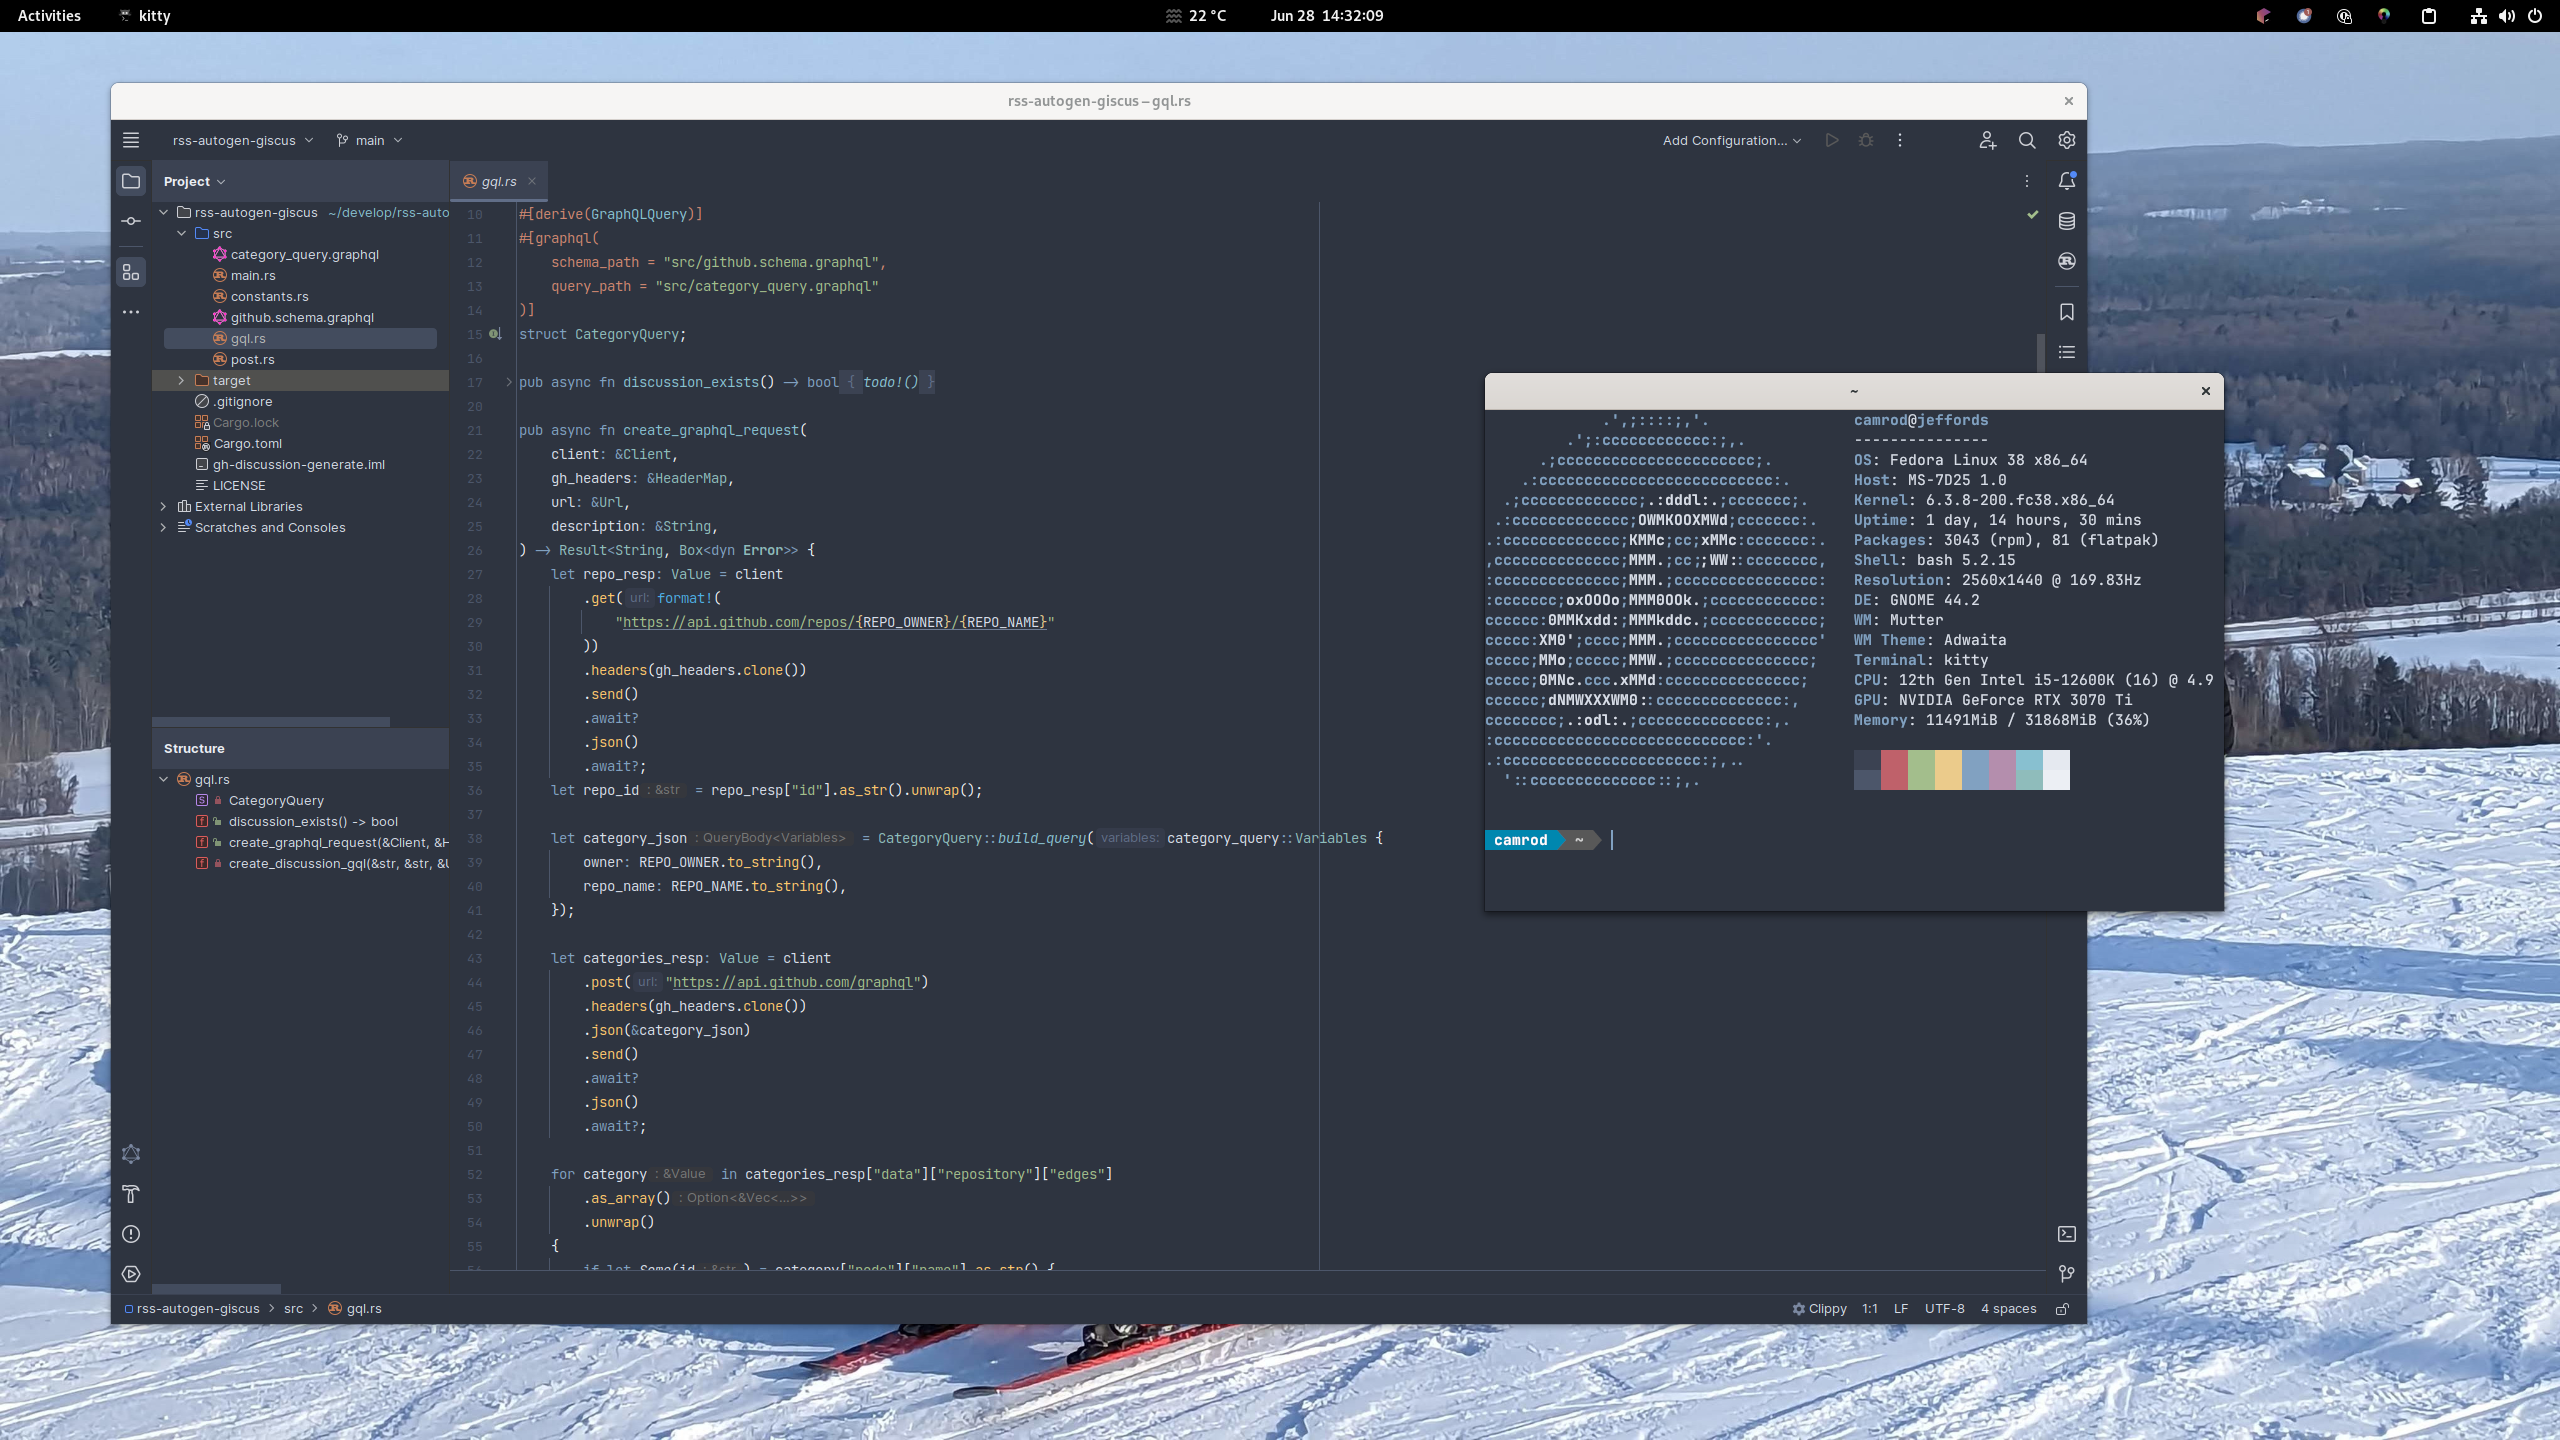 Screenshot of my Fedora desktop, featuring CLion and kitty. CLion is opened to cam-rod/rss-autogen-giscus, and kitty shows neofetch.